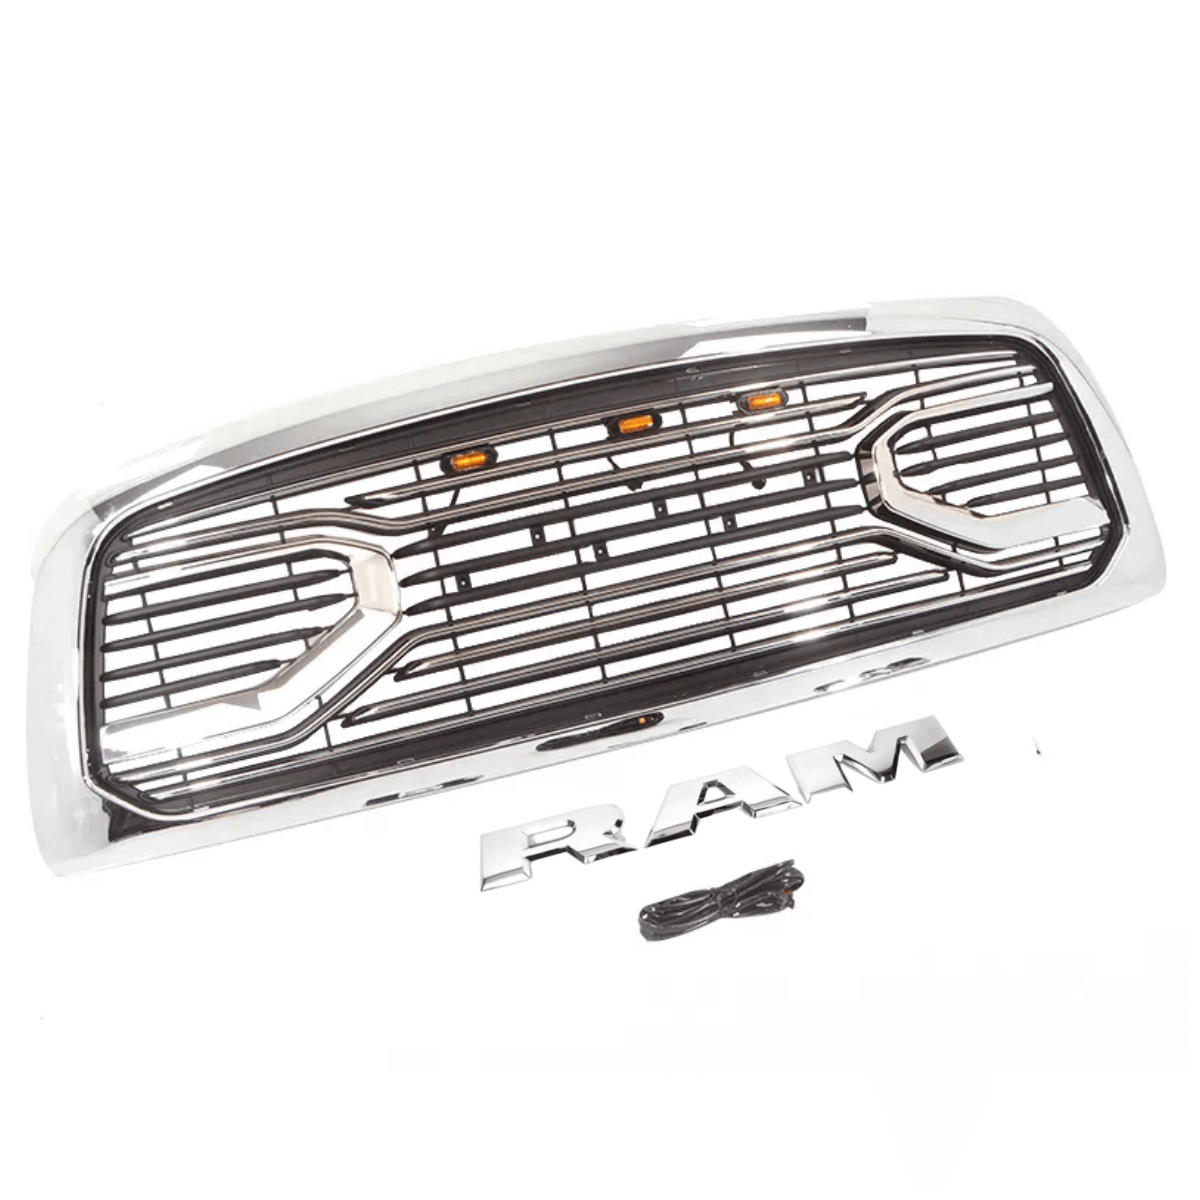 {WildWell}{Dodge Grill}-{Dodge RAM 1500 Grill 2009-2013/3}-Right